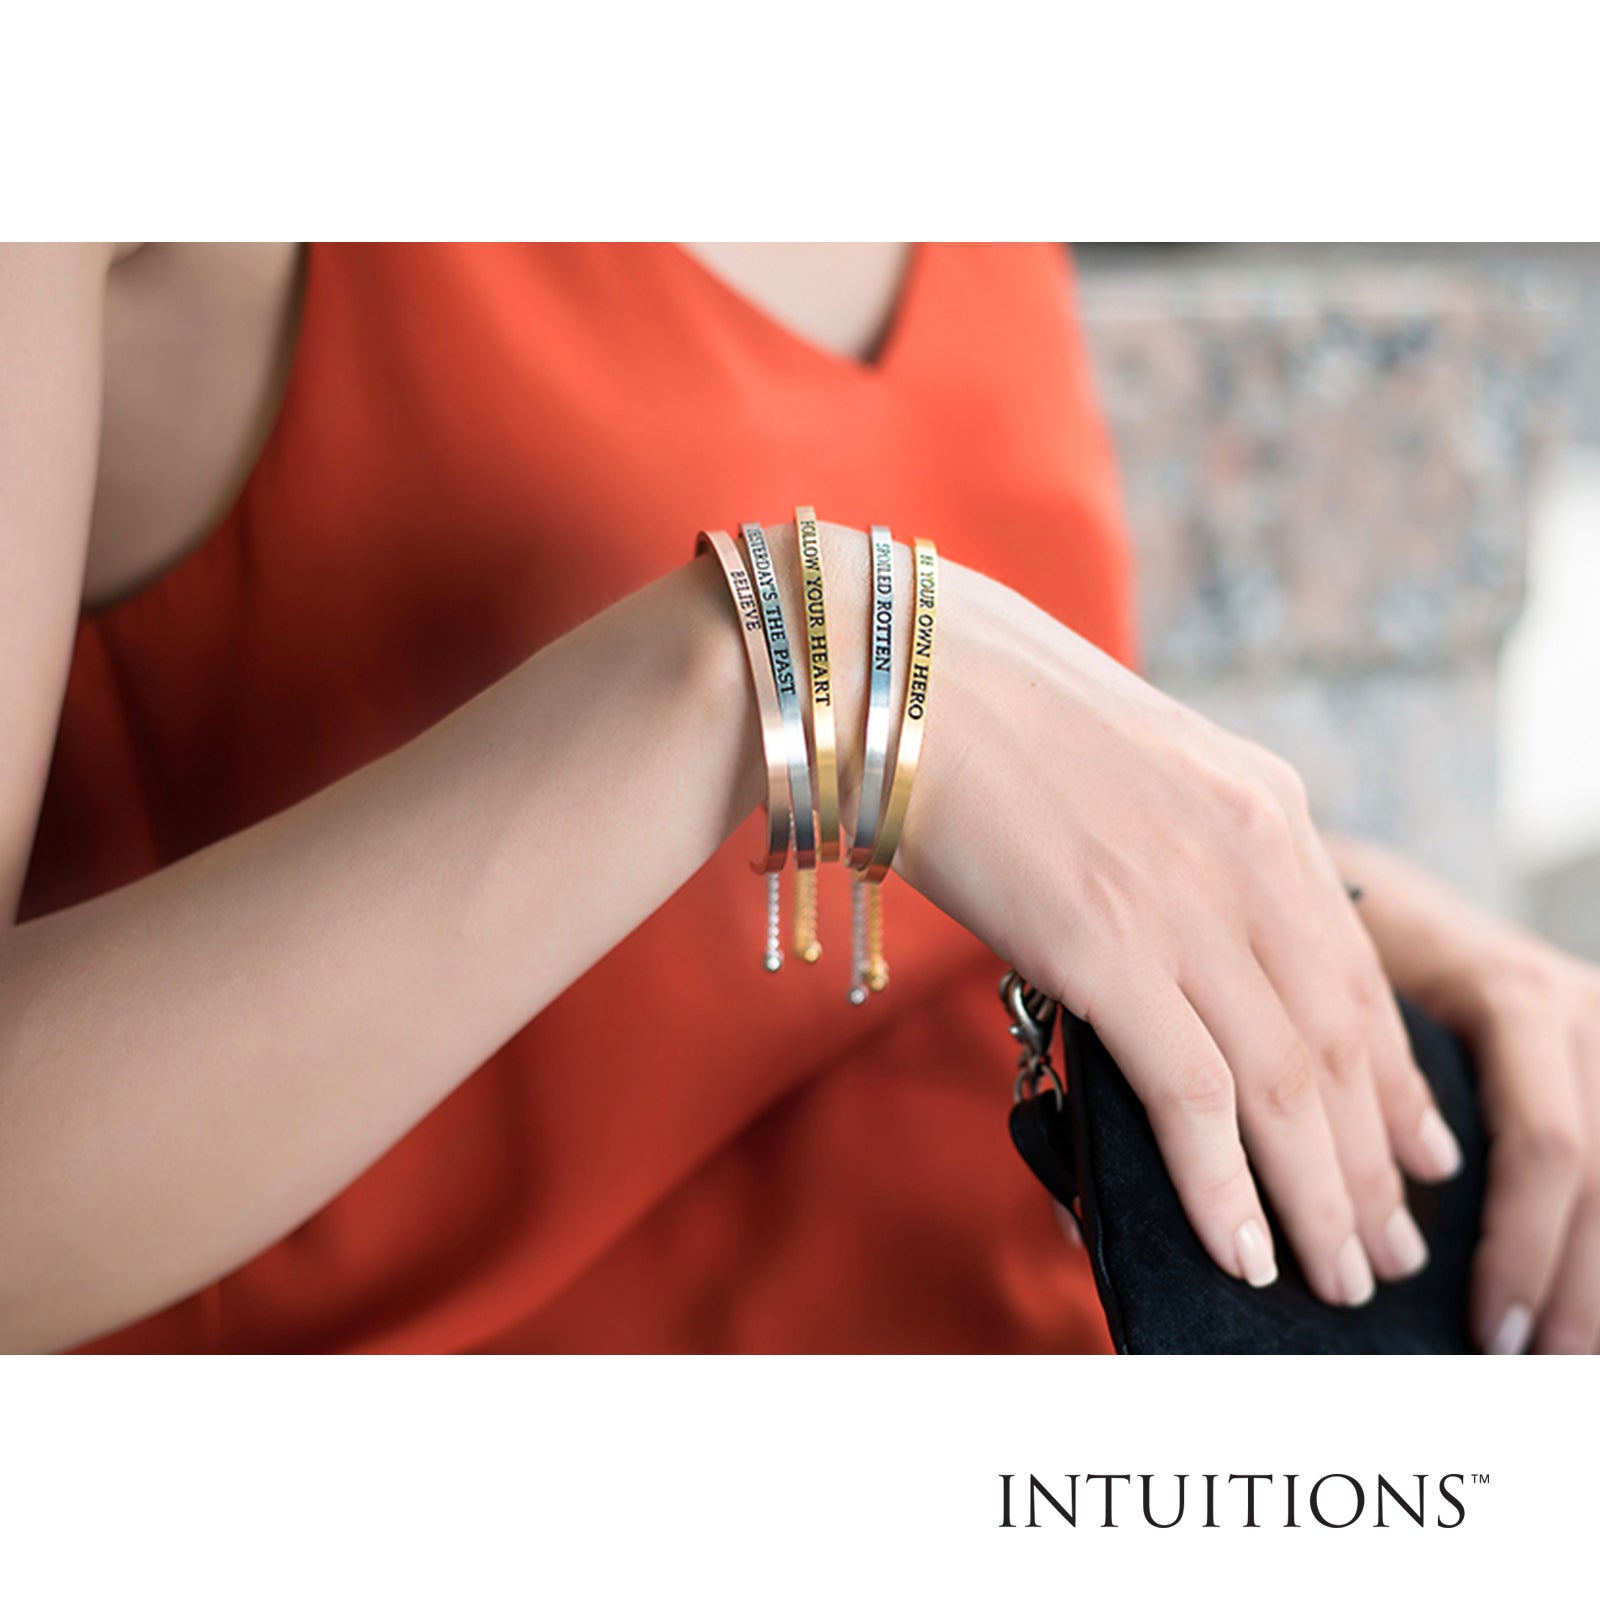 Intuitions Stainless Steel GOD MOVES IN MYSTERIOUS WAYS Diamond Accent Cuff Bangle Bracelet